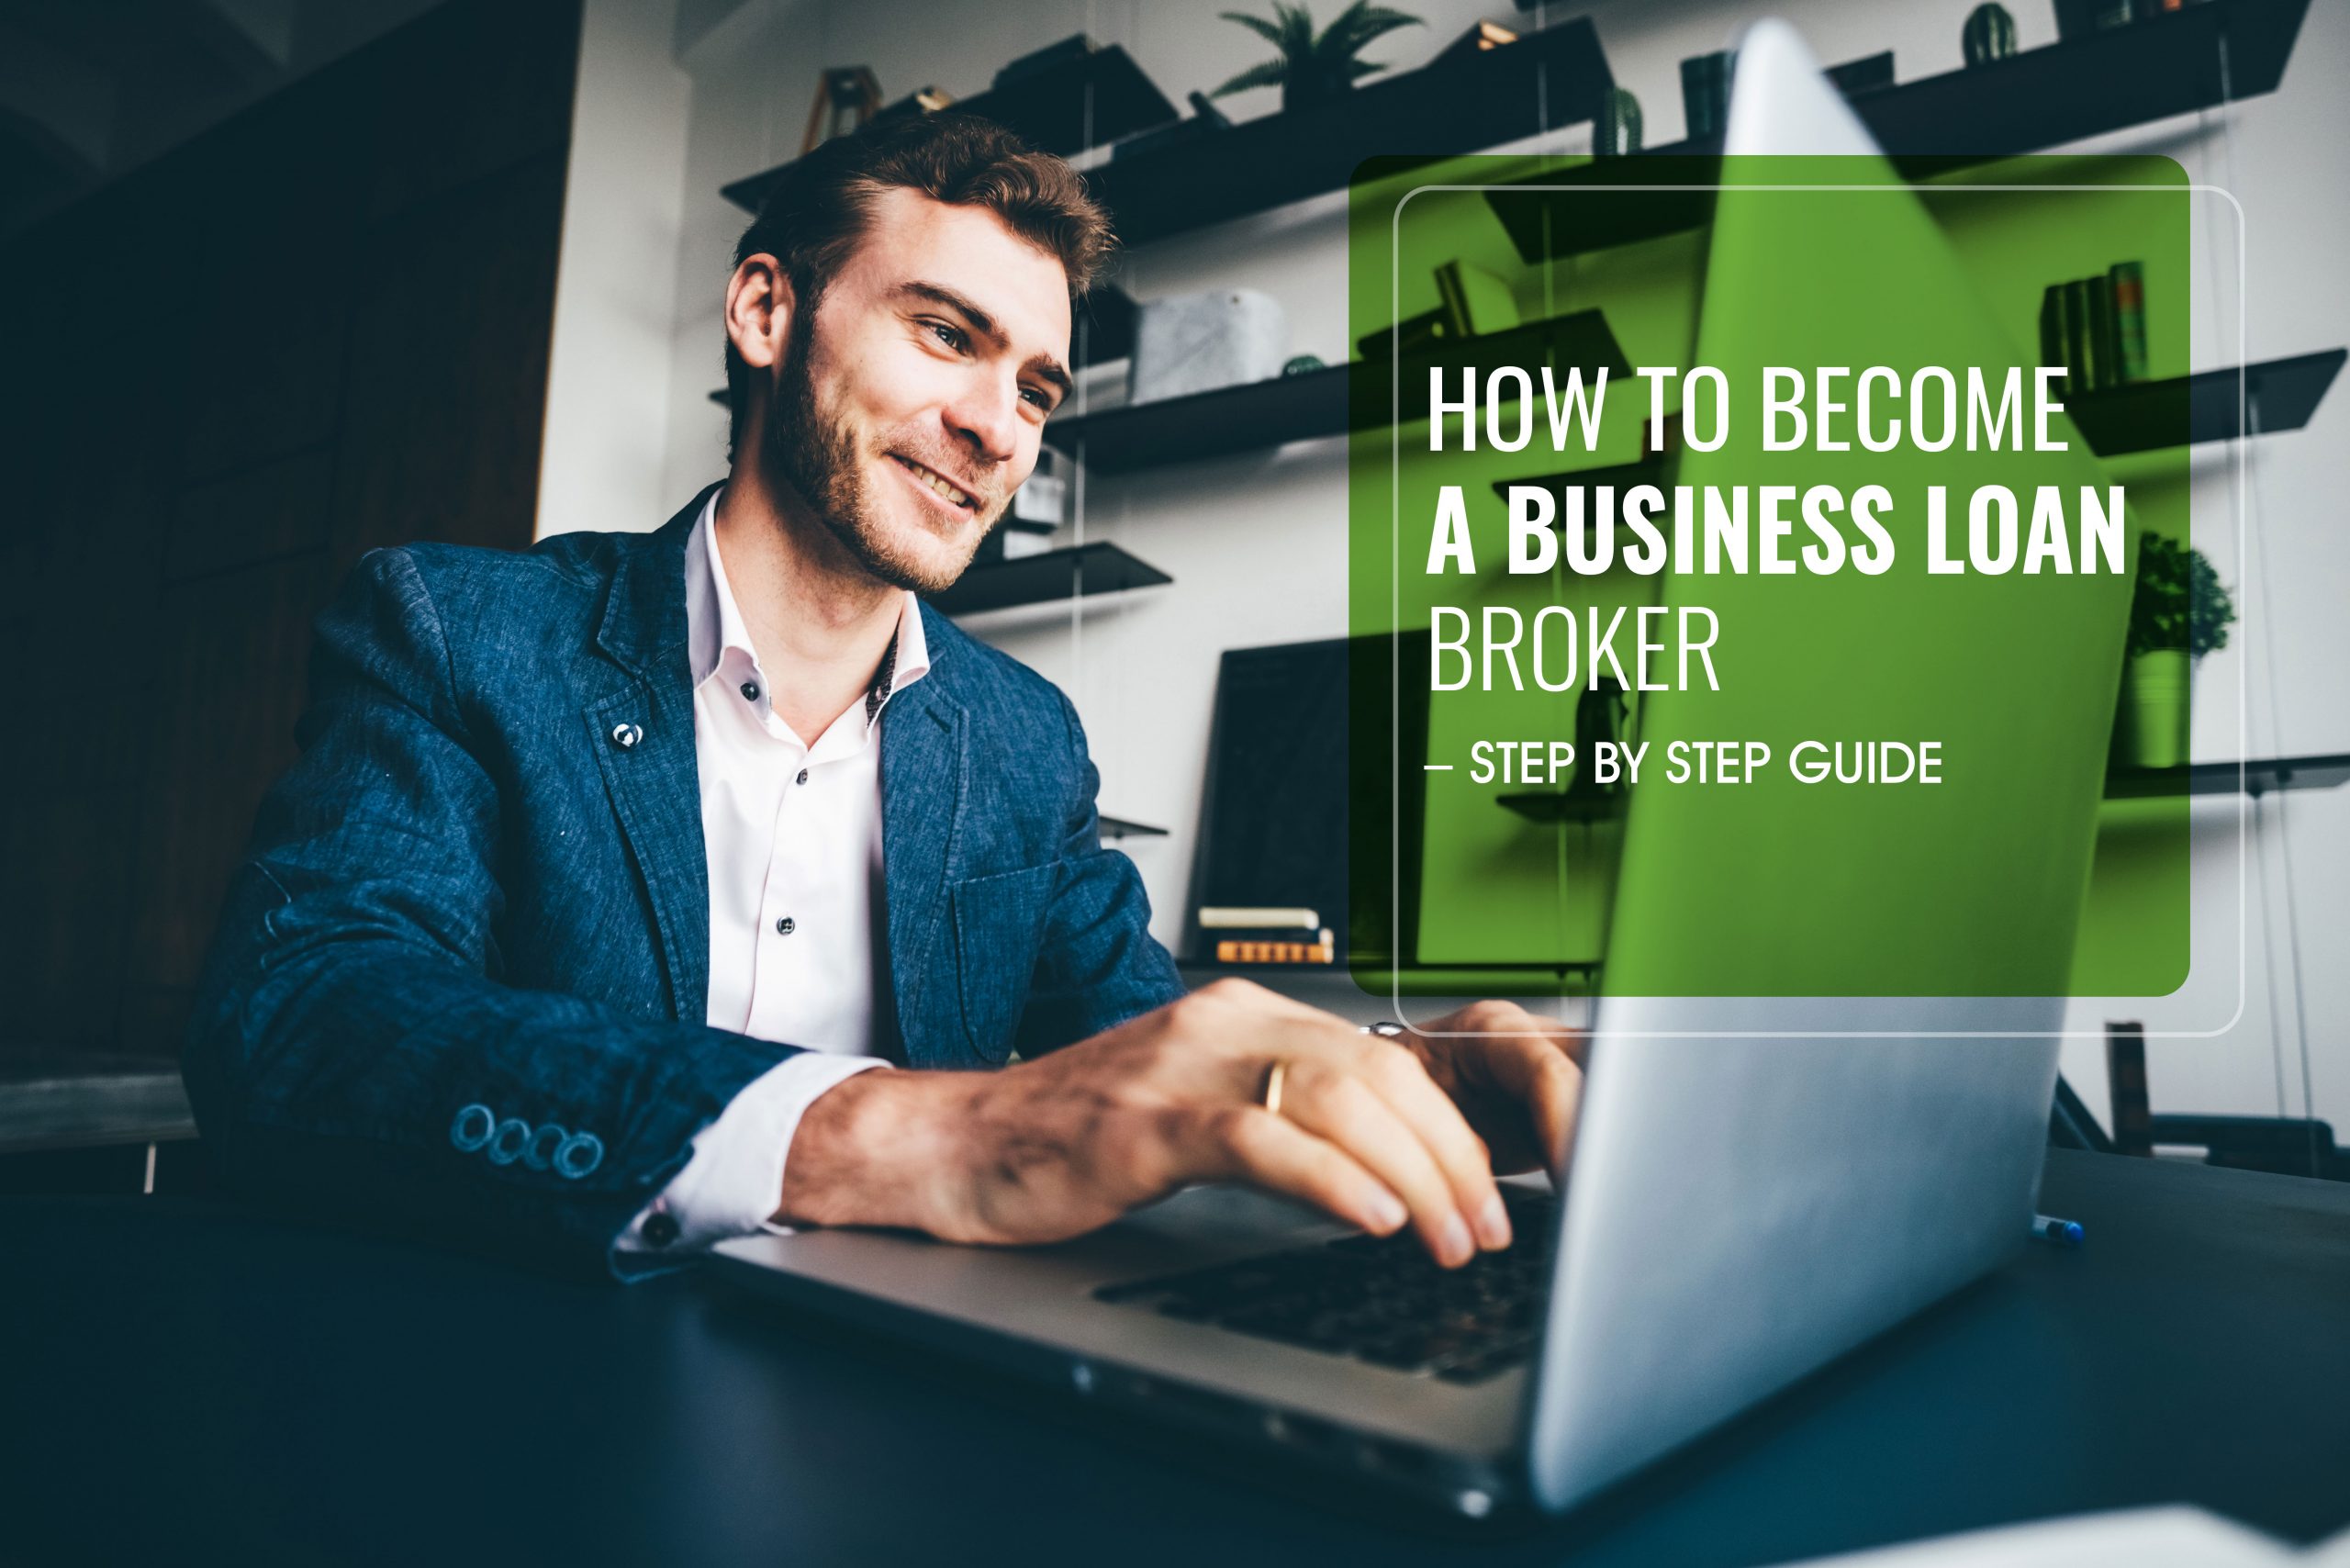 How to Become a Business Loan Broker